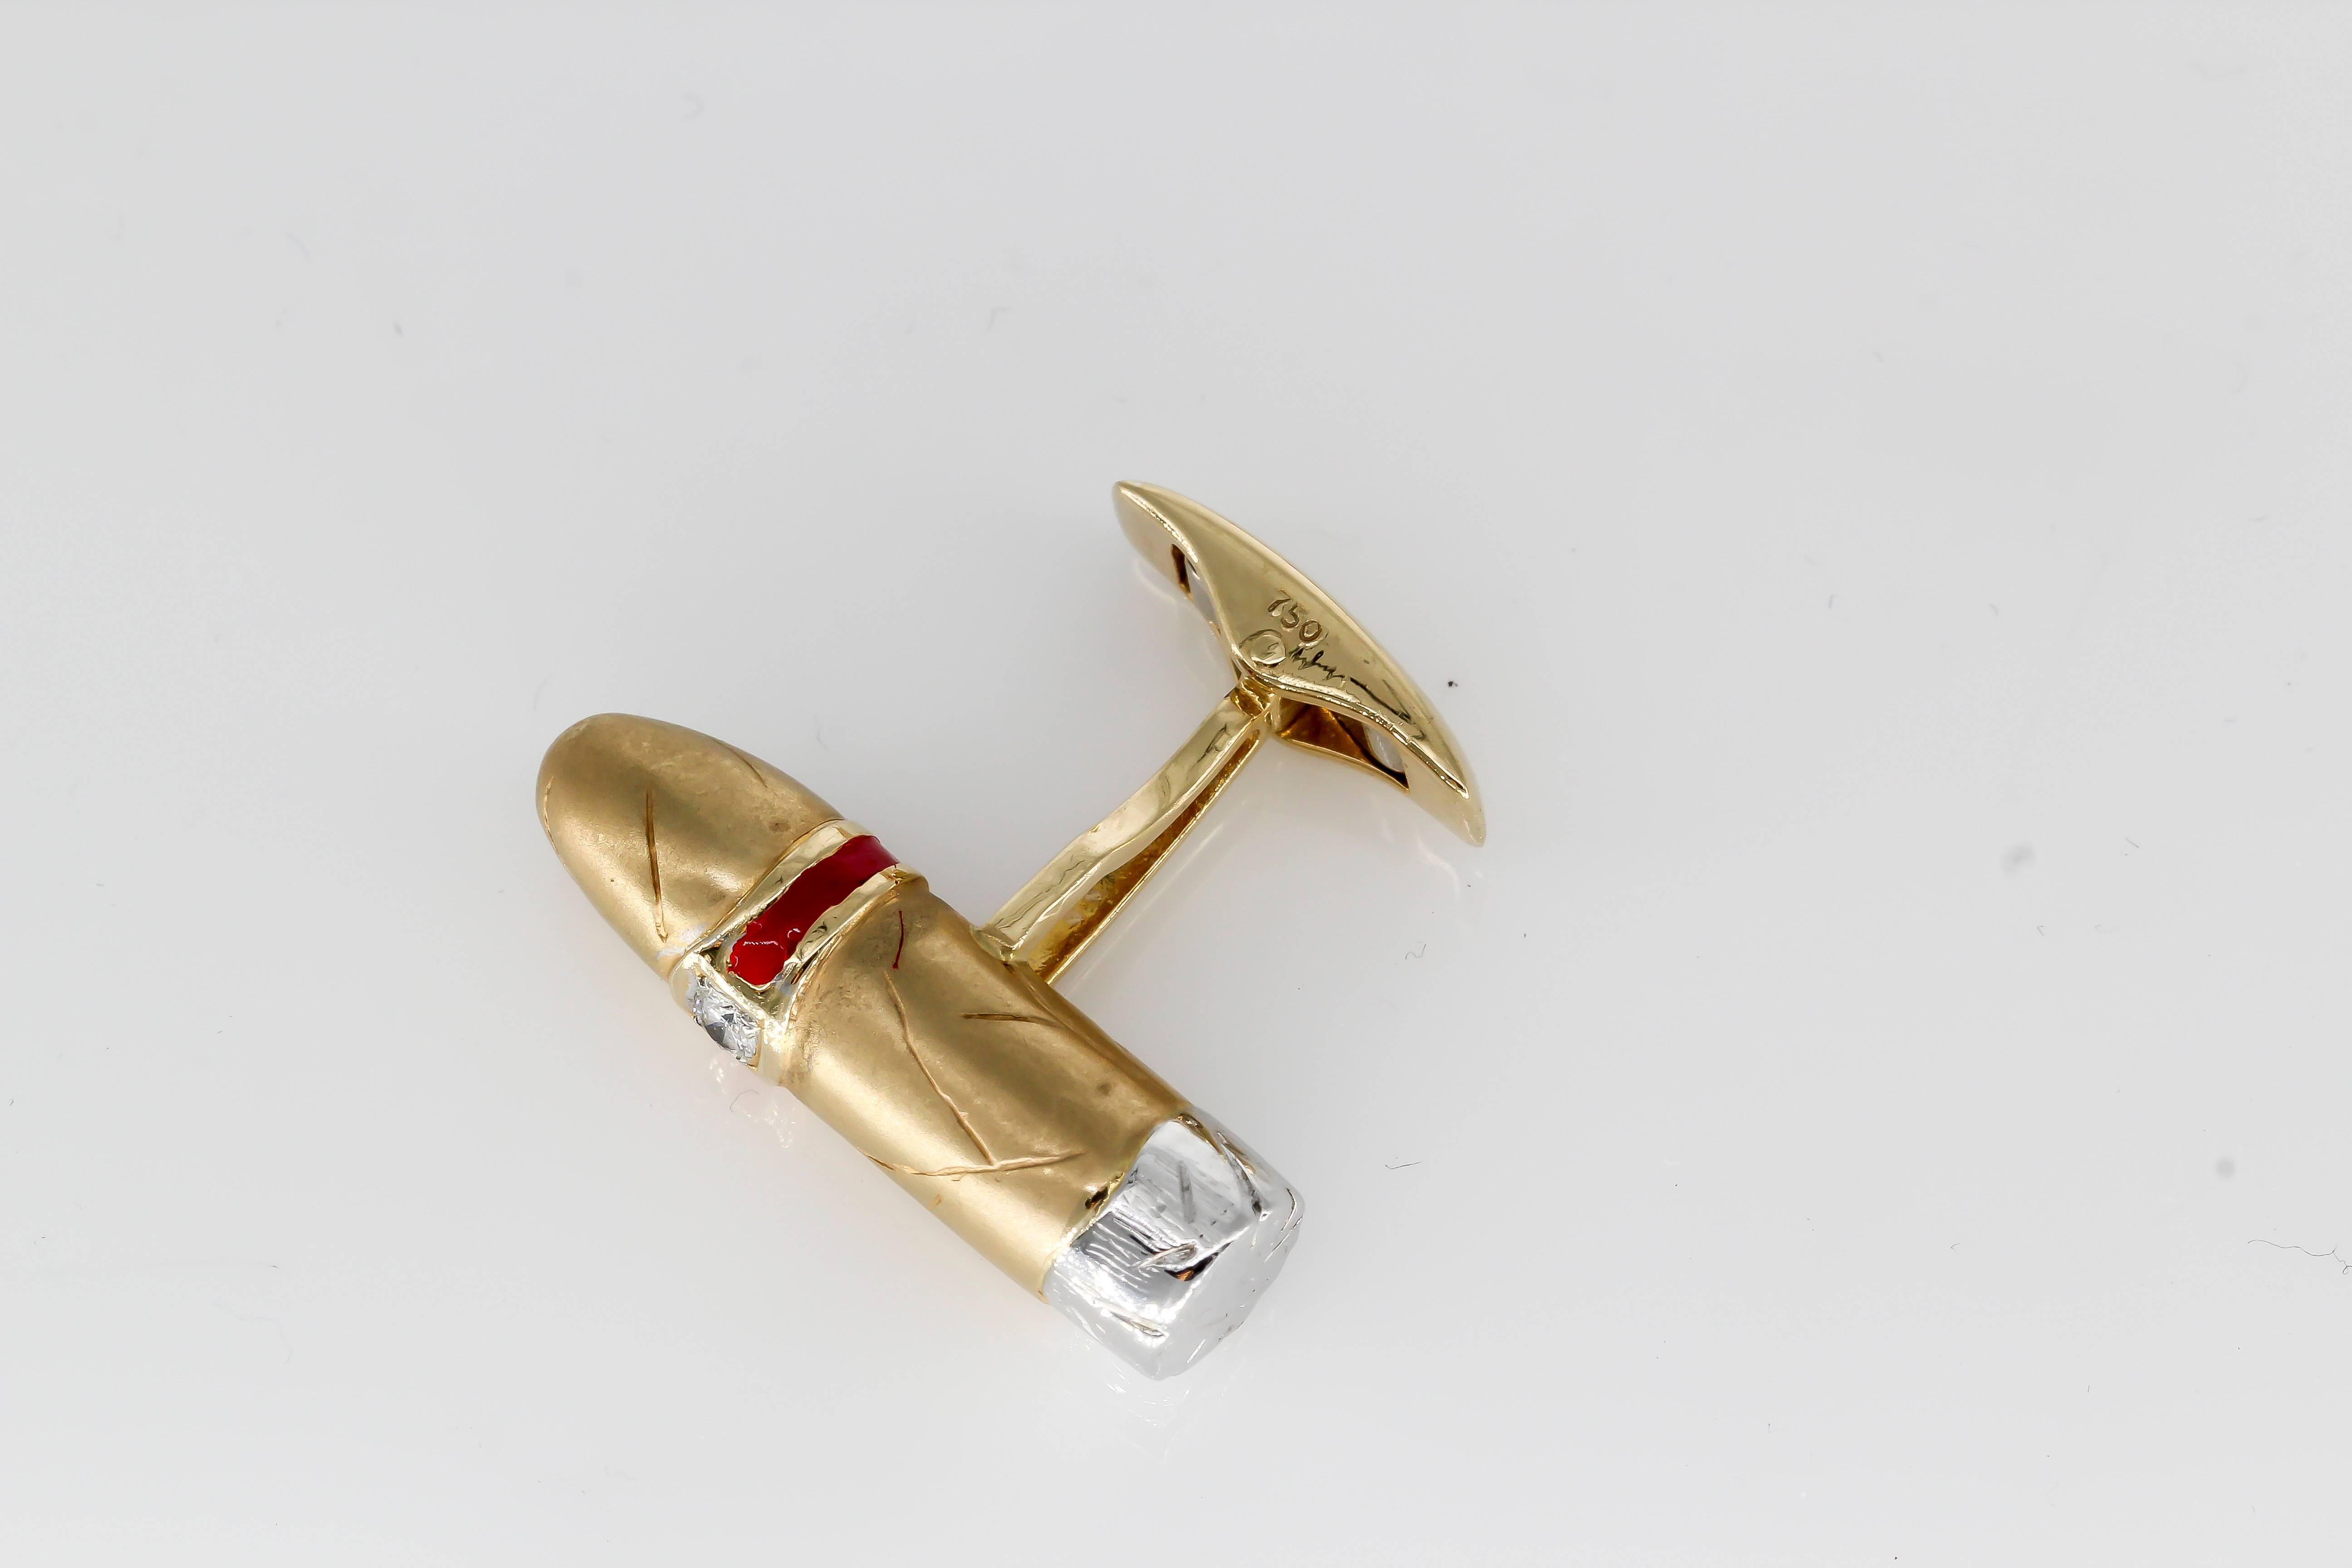 Cigar Shaped Enamel Diamond Gold Cufflinks In Excellent Condition For Sale In New York, NY